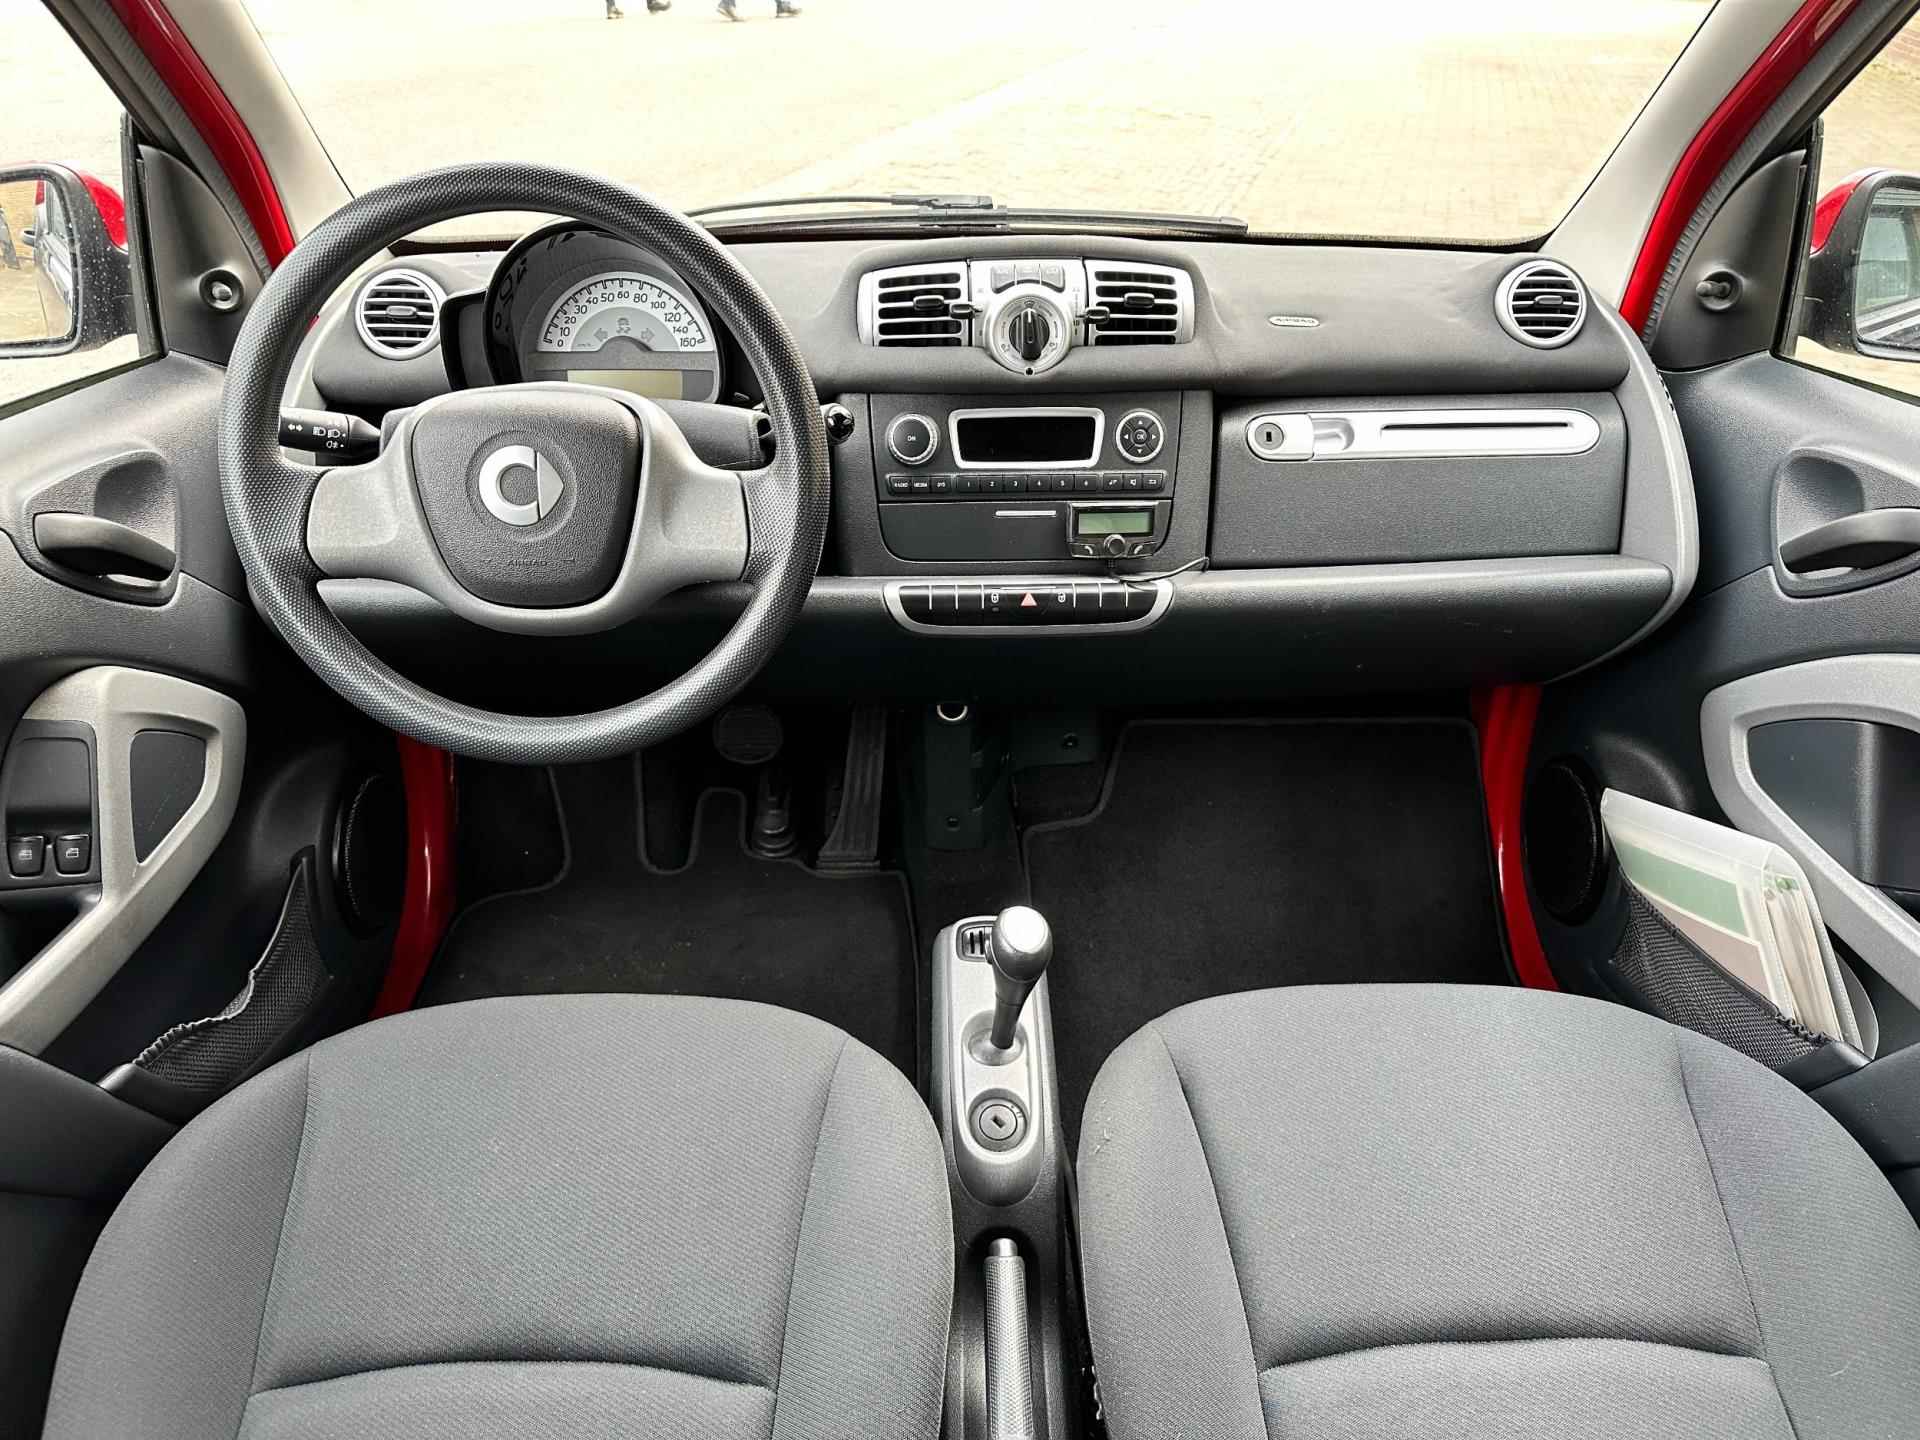 Smart Fortwo coupé 1.0 mhd Pure automaat - 10/23